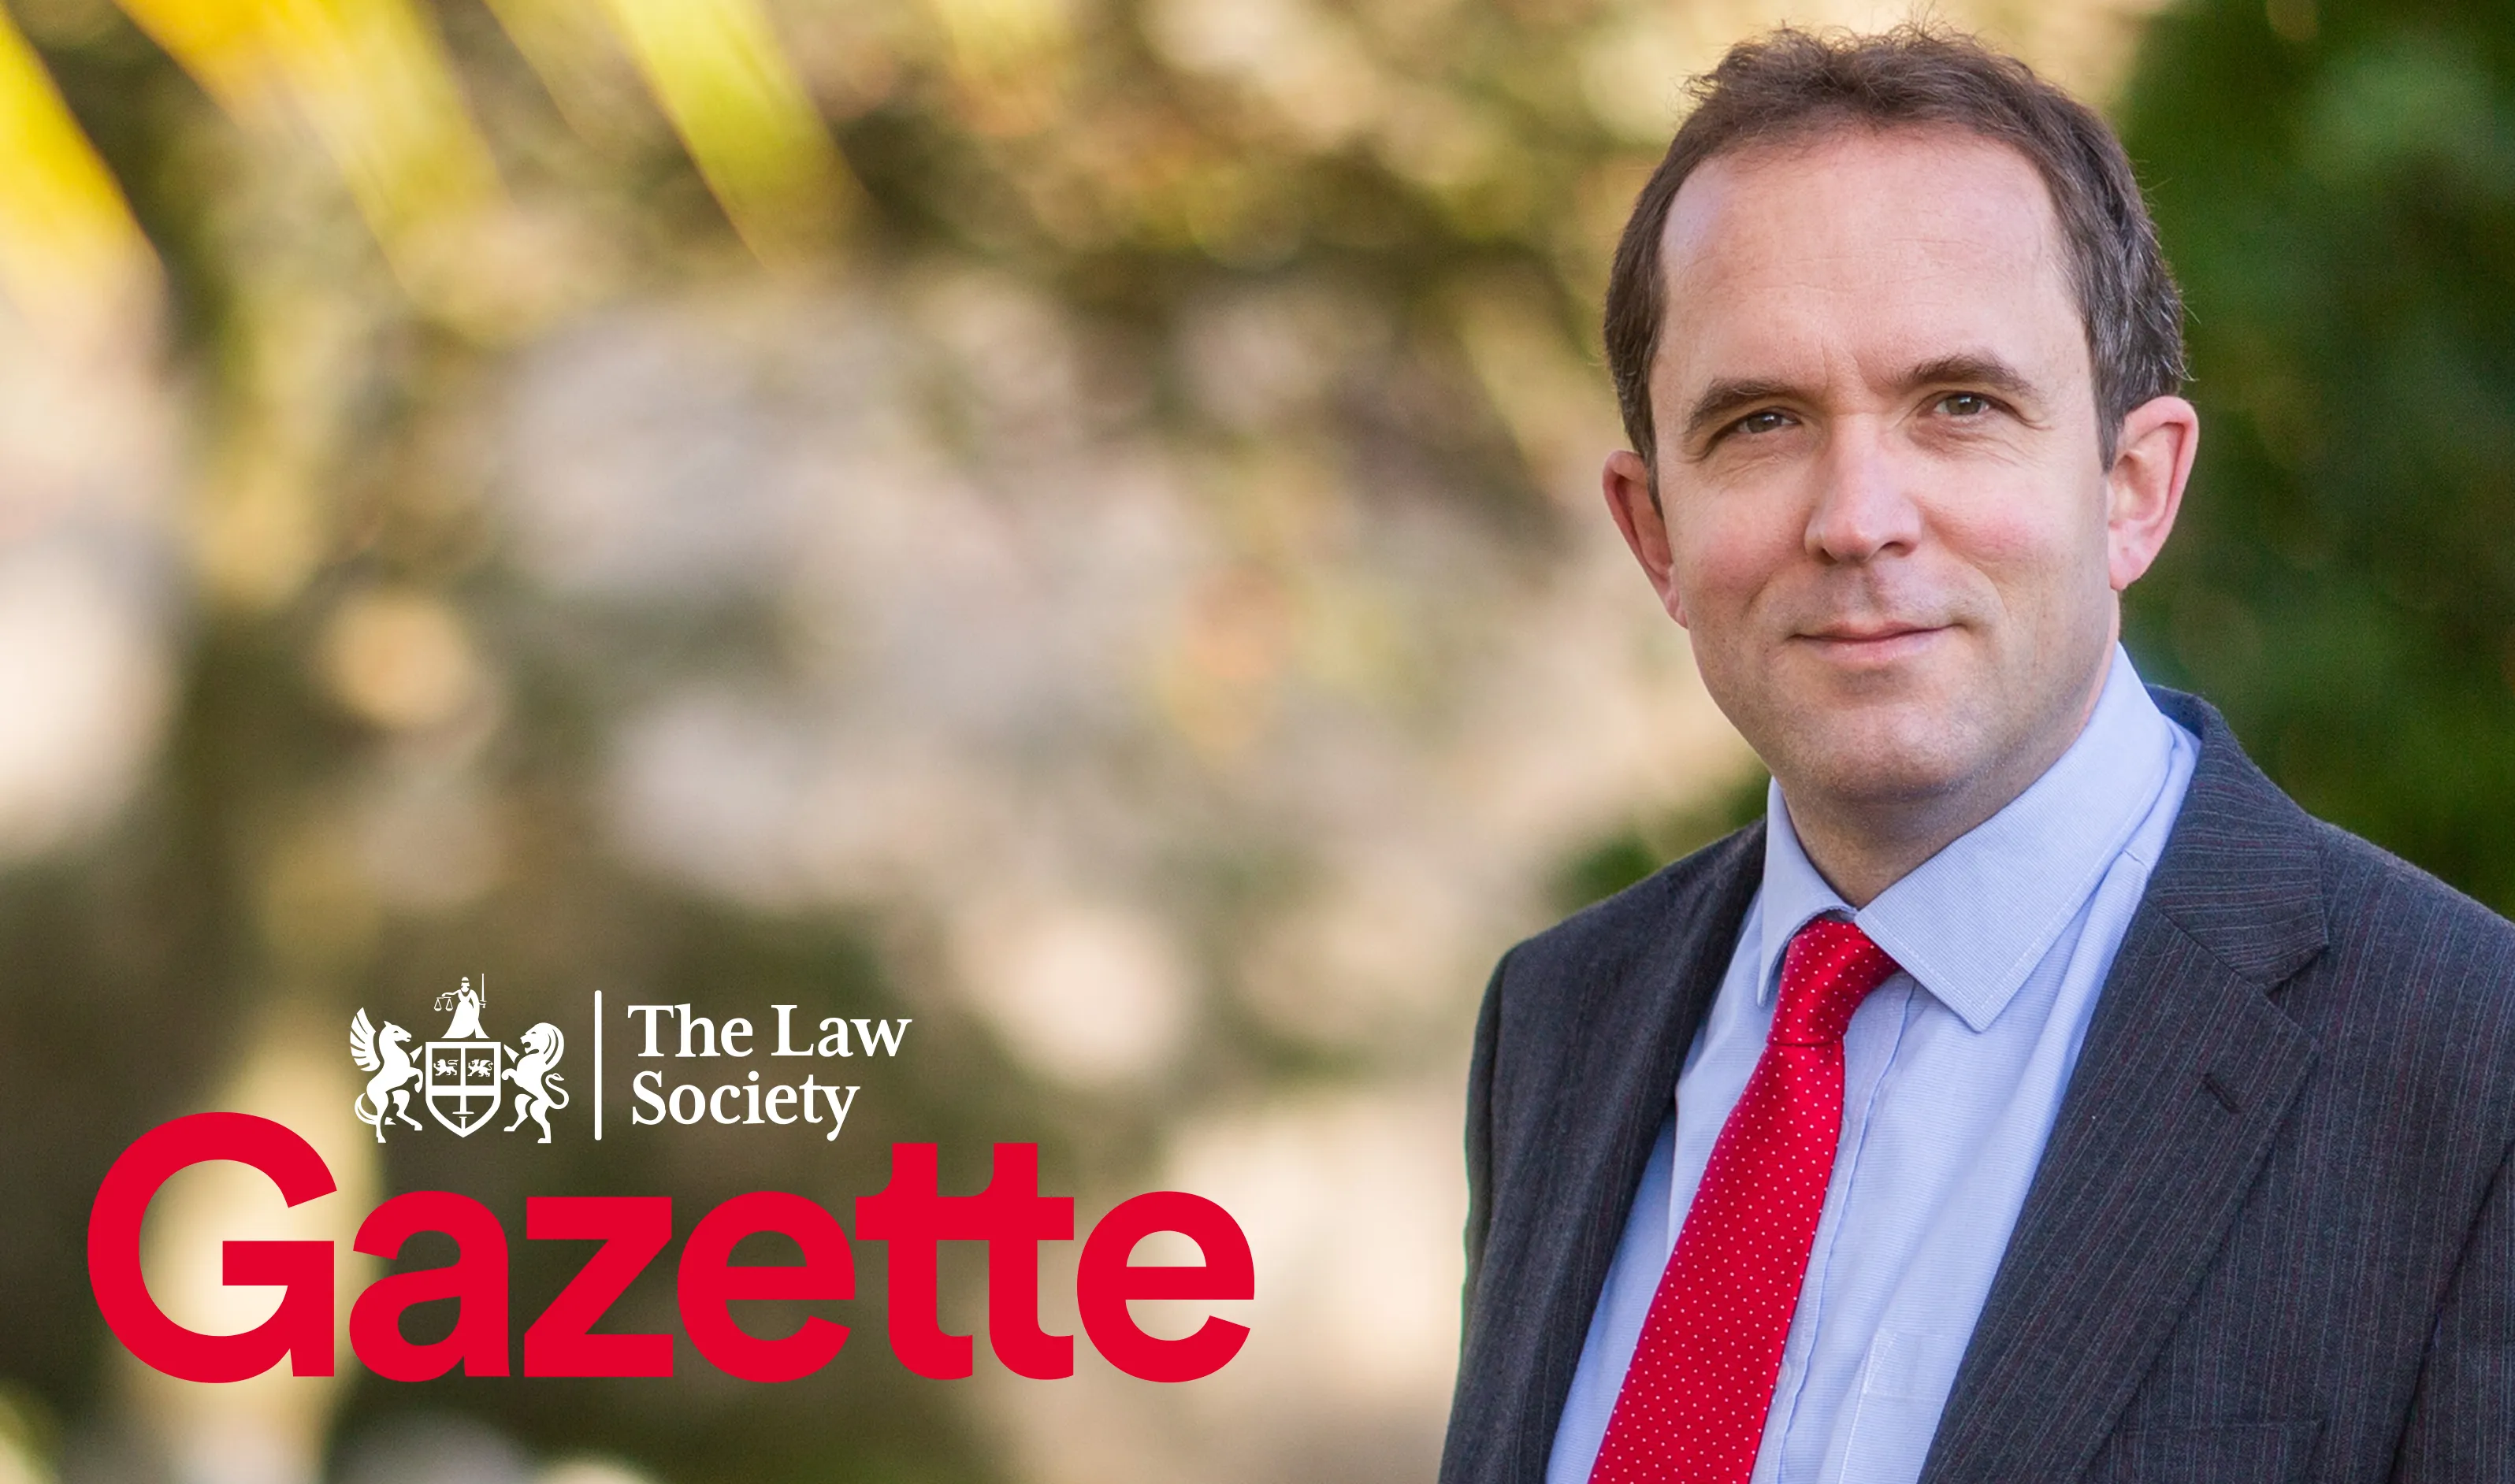 Edward Cooke's latest opinion piece published in The Law Society Gazette